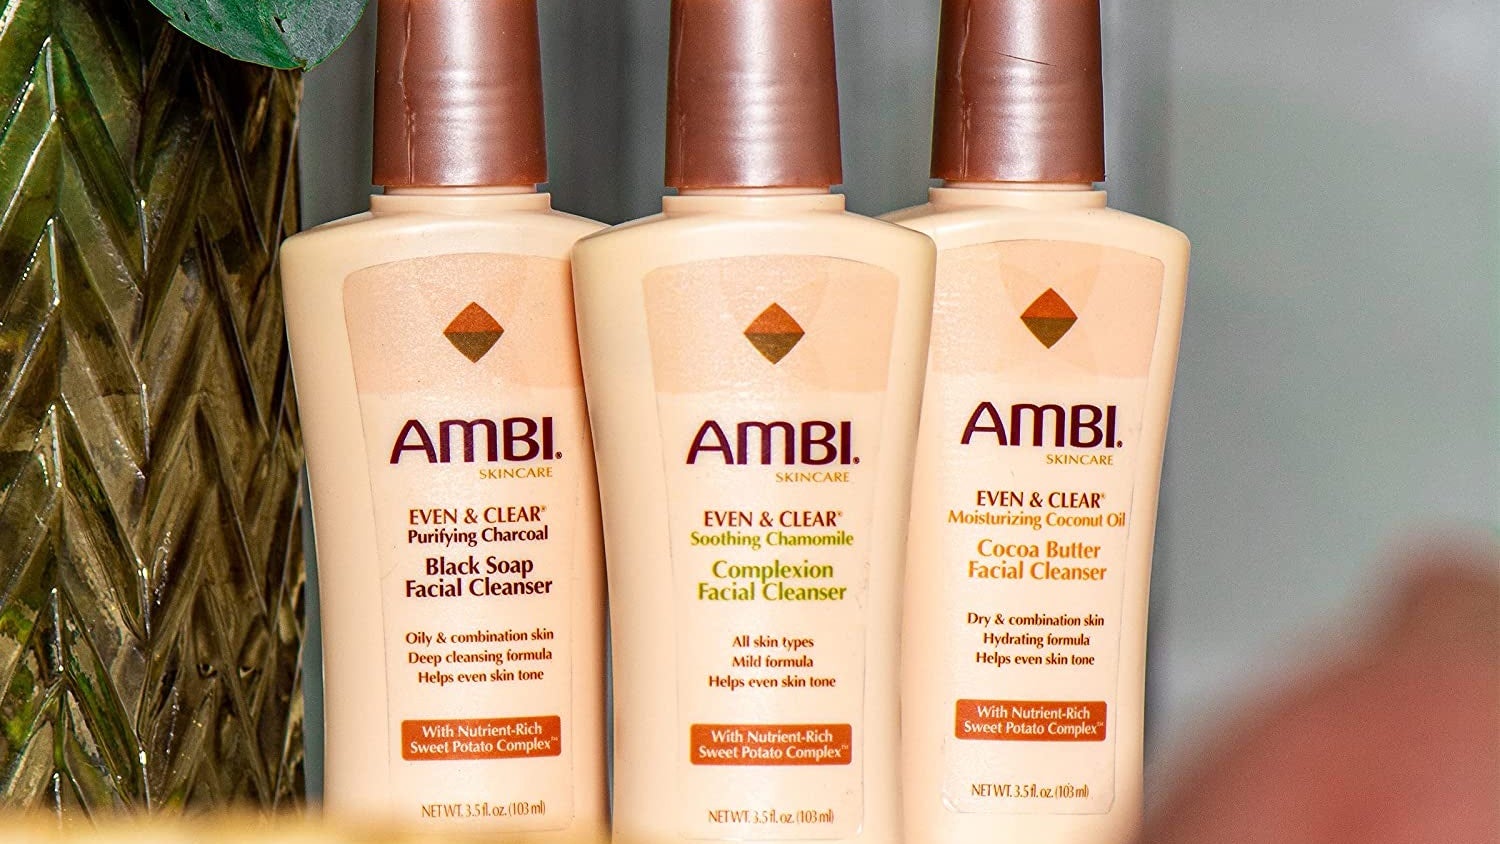 Ambi Skincare Settles The Great Sweet Potato Debate With Even & Clear Collection Launch